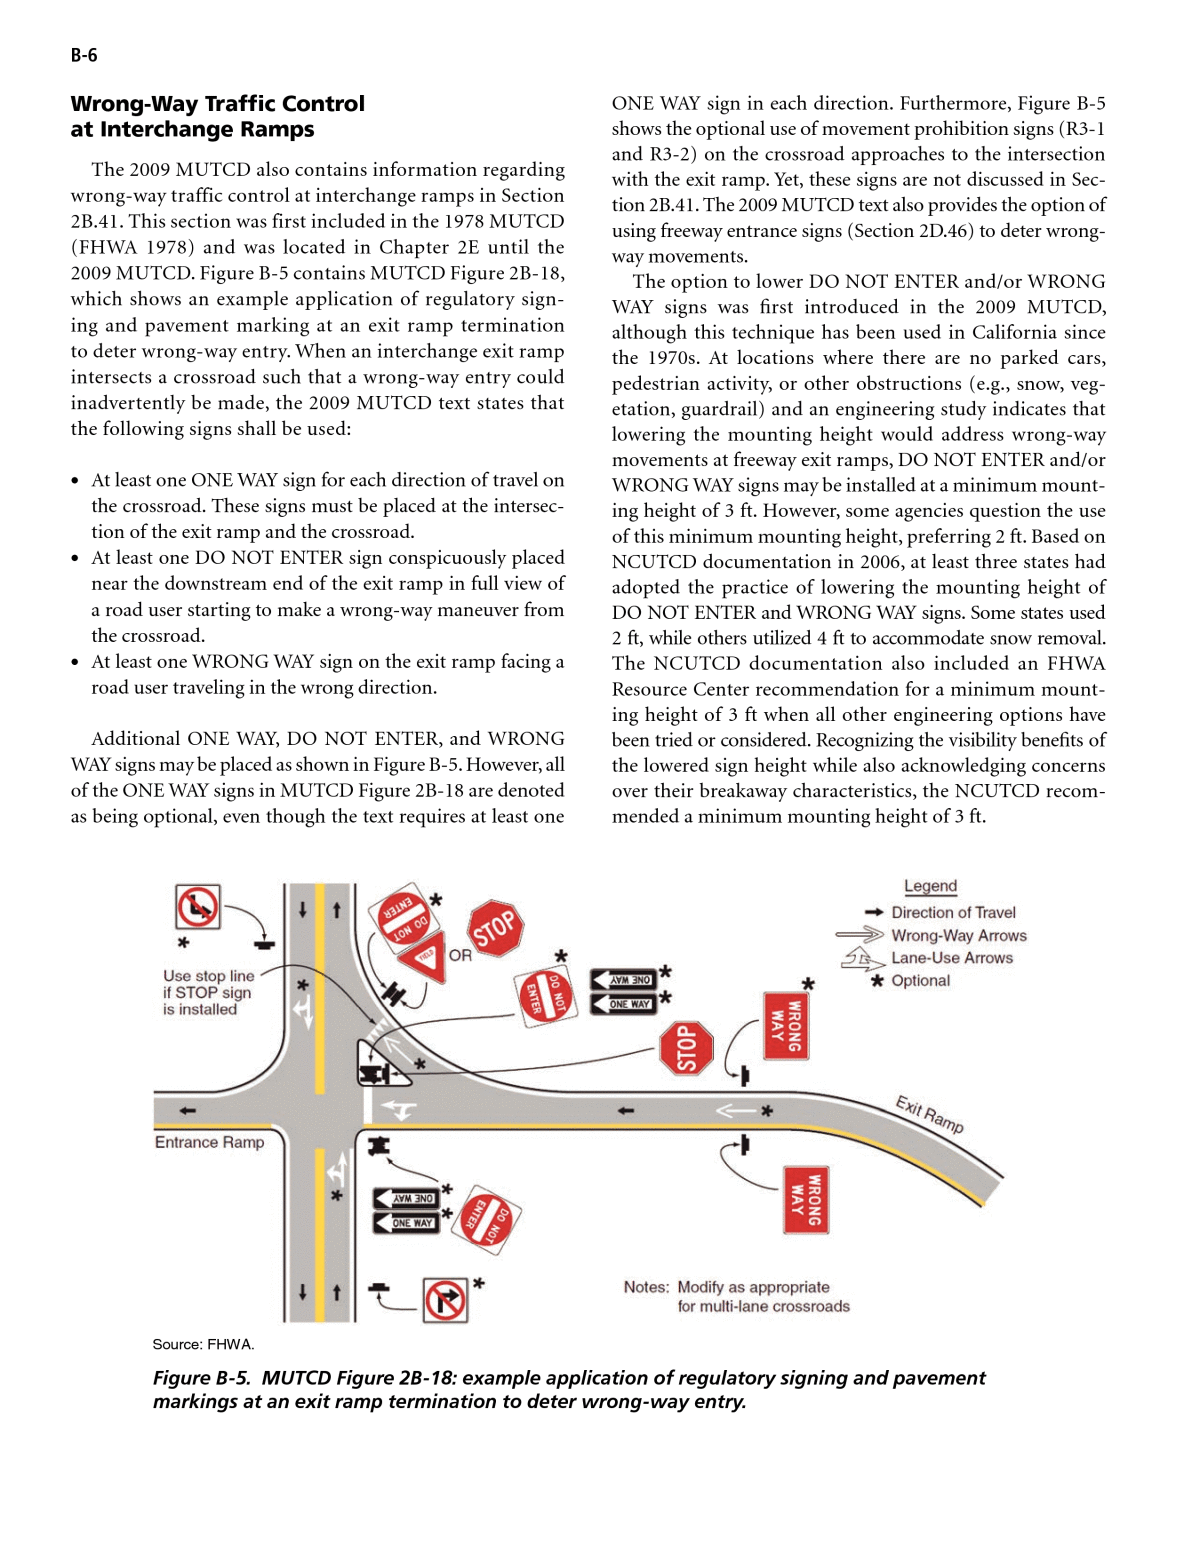 Appendix B Mutcd Review Traffic Control Devices And Measures For Deterring Wrong Way Movements The National Academies Press